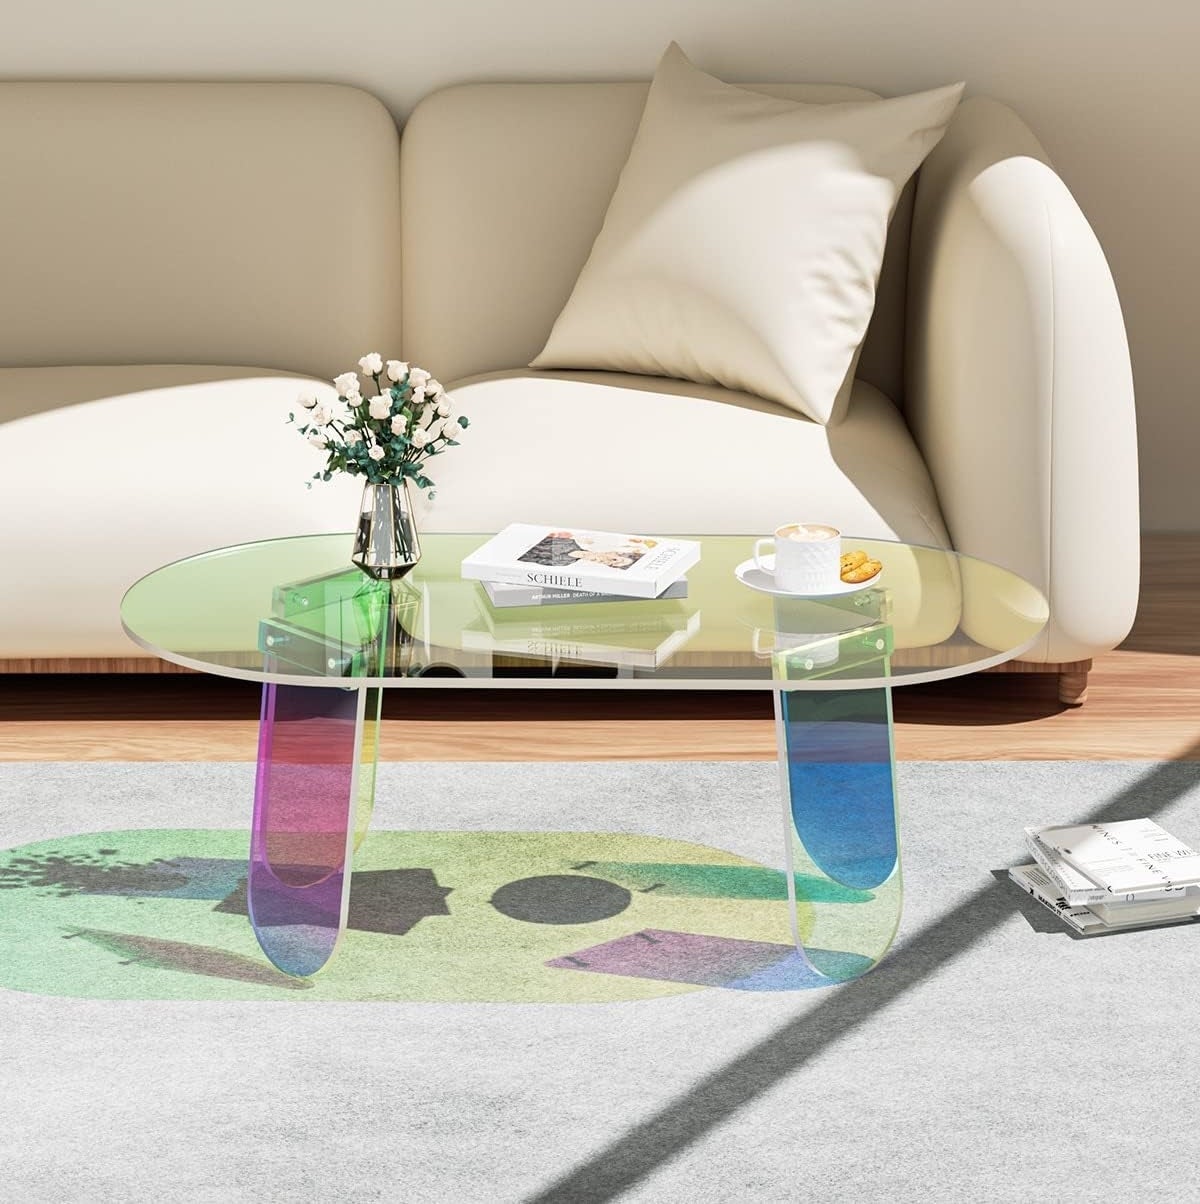 Transparent coffee table with books in a living room, featuring a rug and a beige sofa